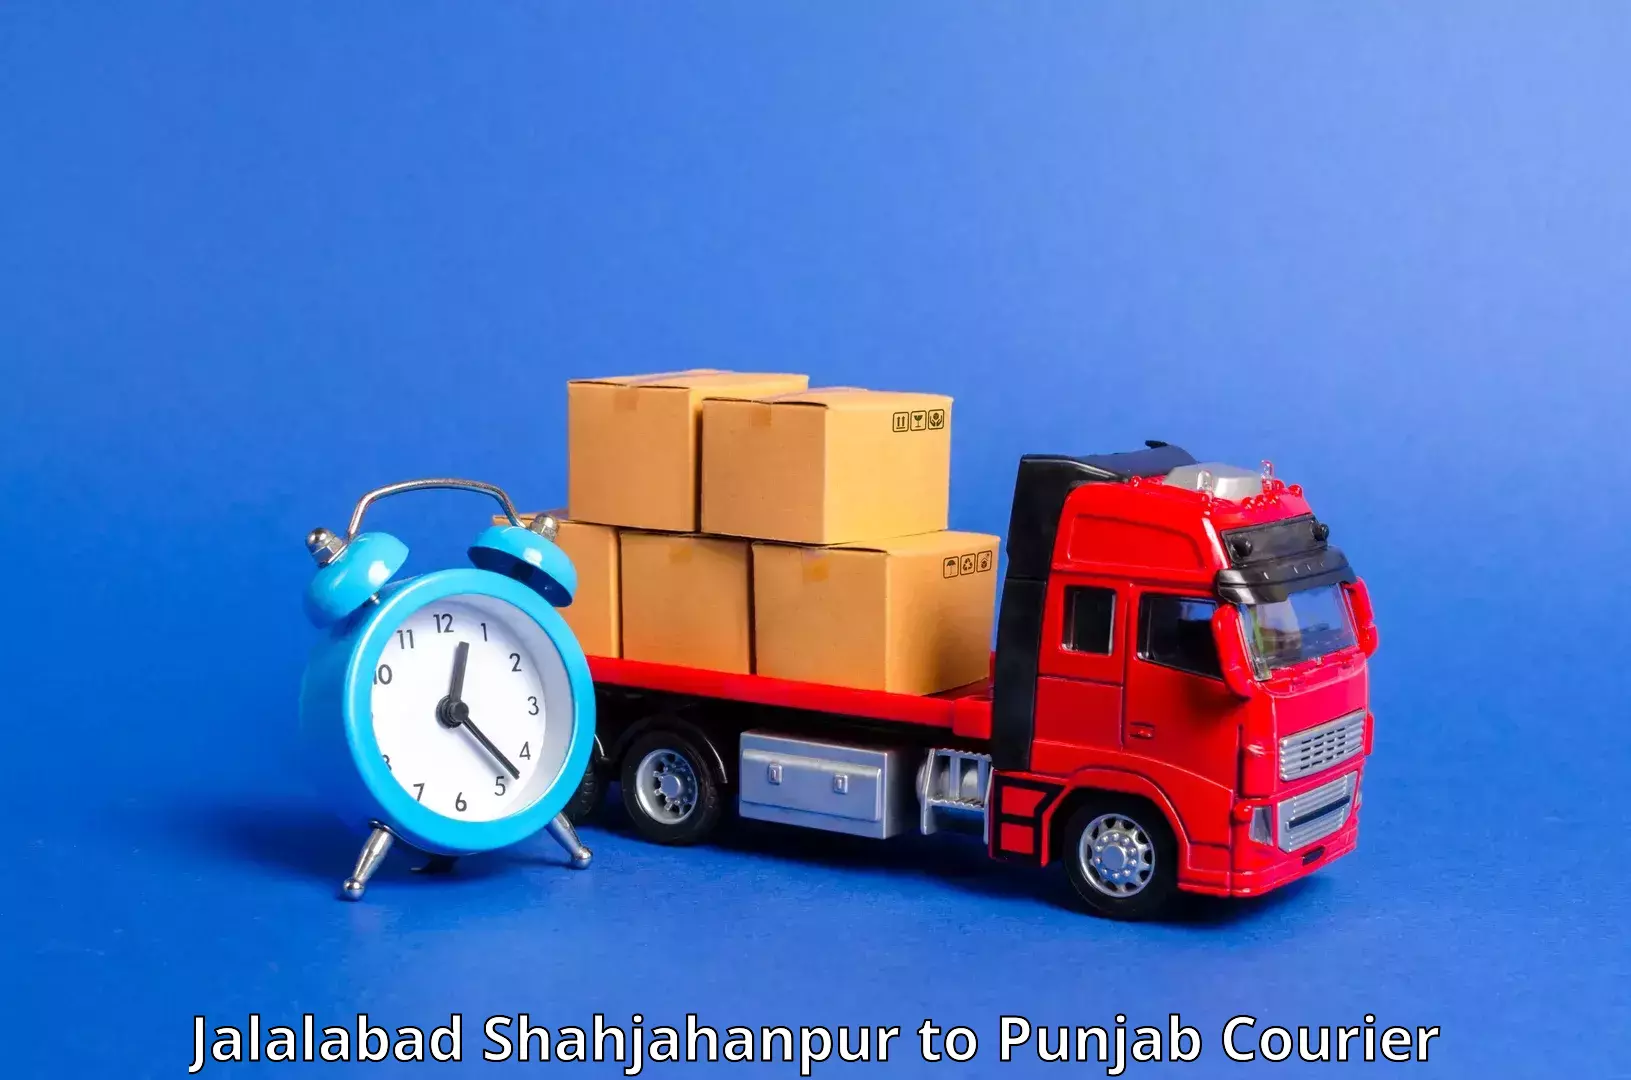 Flexible parcel services in Jalalabad Shahjahanpur to Fatehgarh Sahib